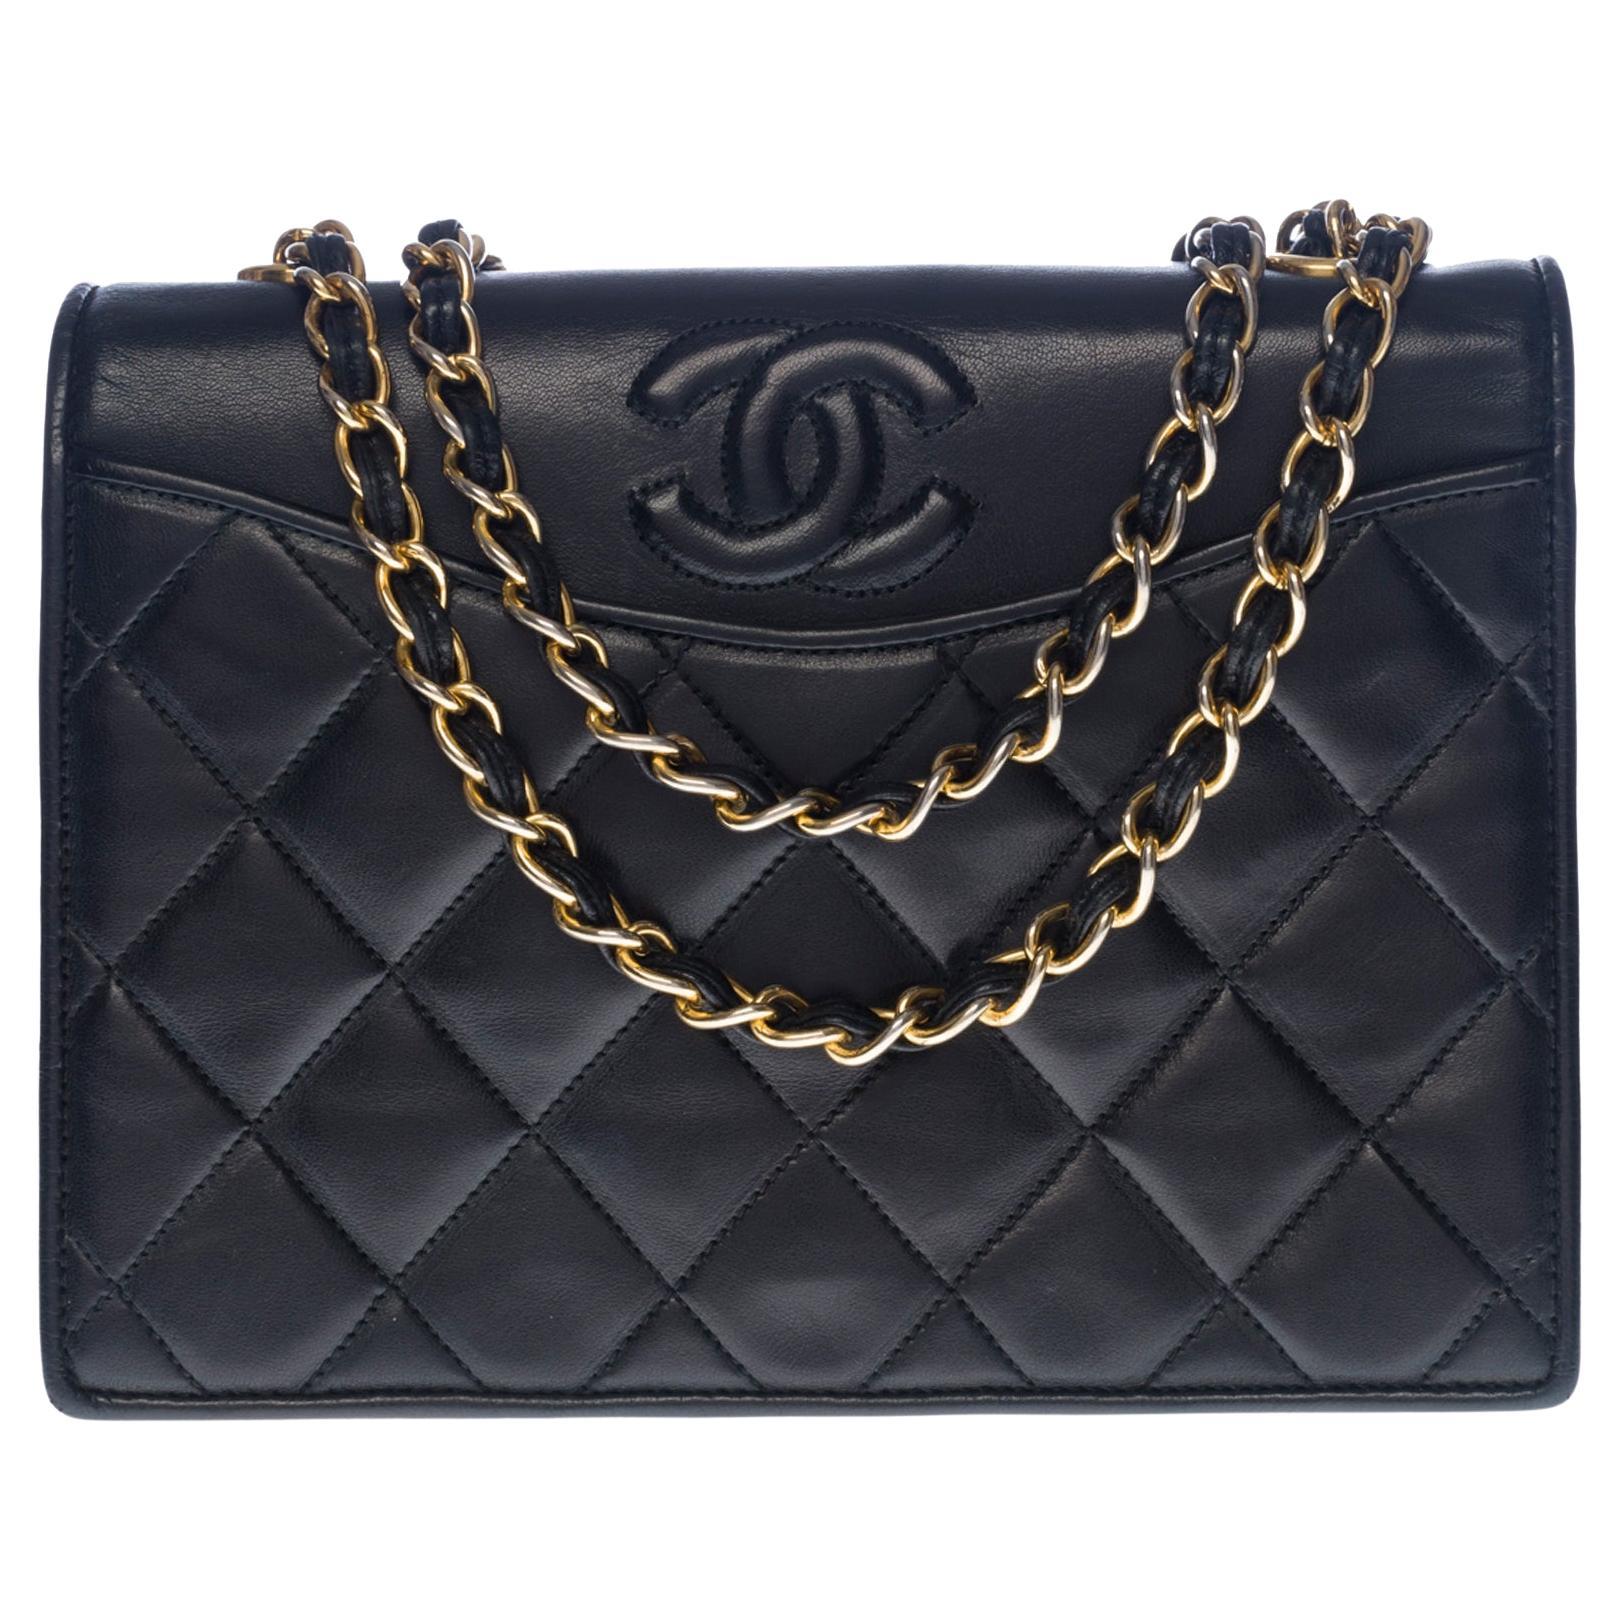 Chanel Classic Full Flap Pockets shoulder bag in black quilted leather ...